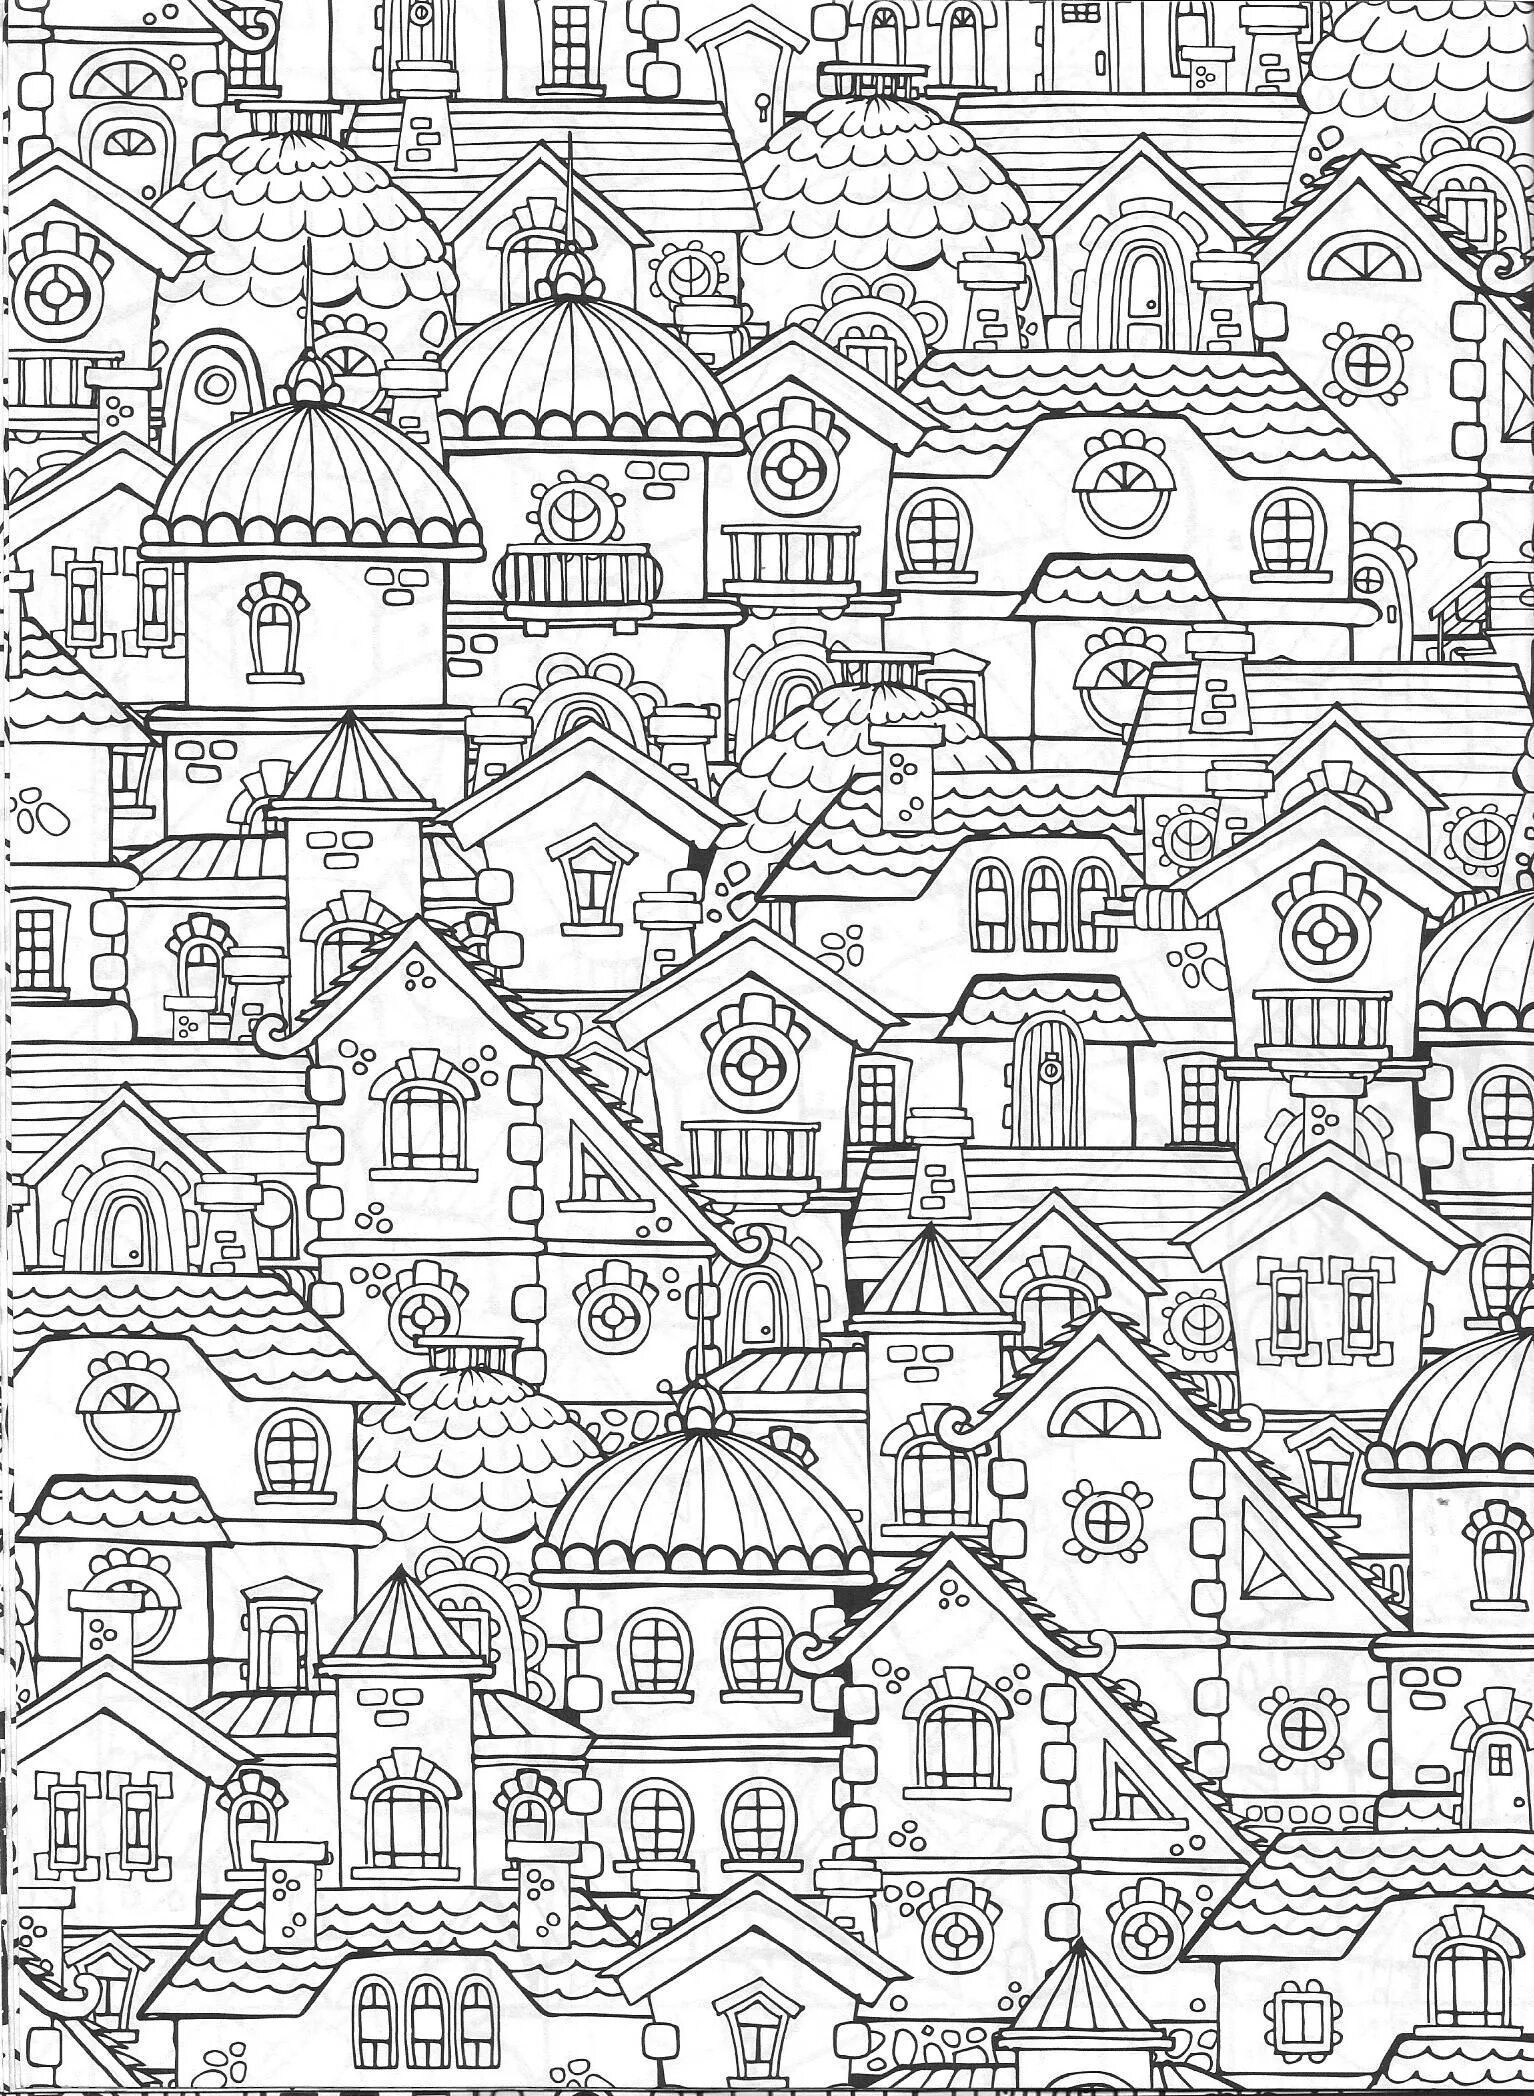 Coloring ethereal house for adults